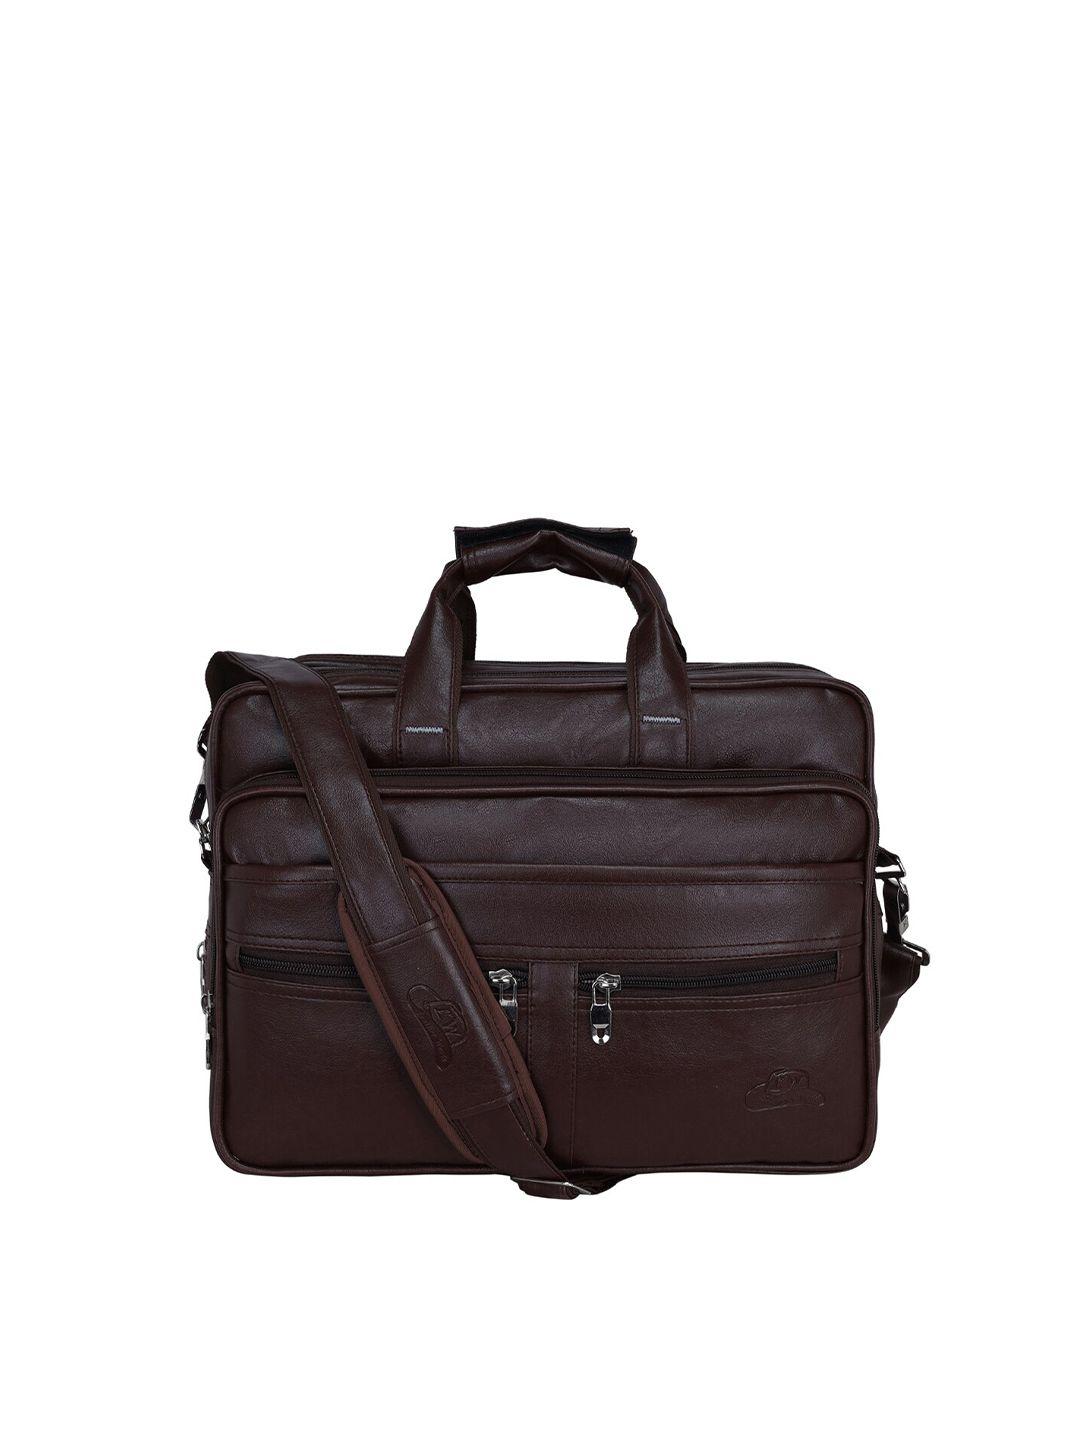 leather world unisex coffee brown 15 inch laptop bag